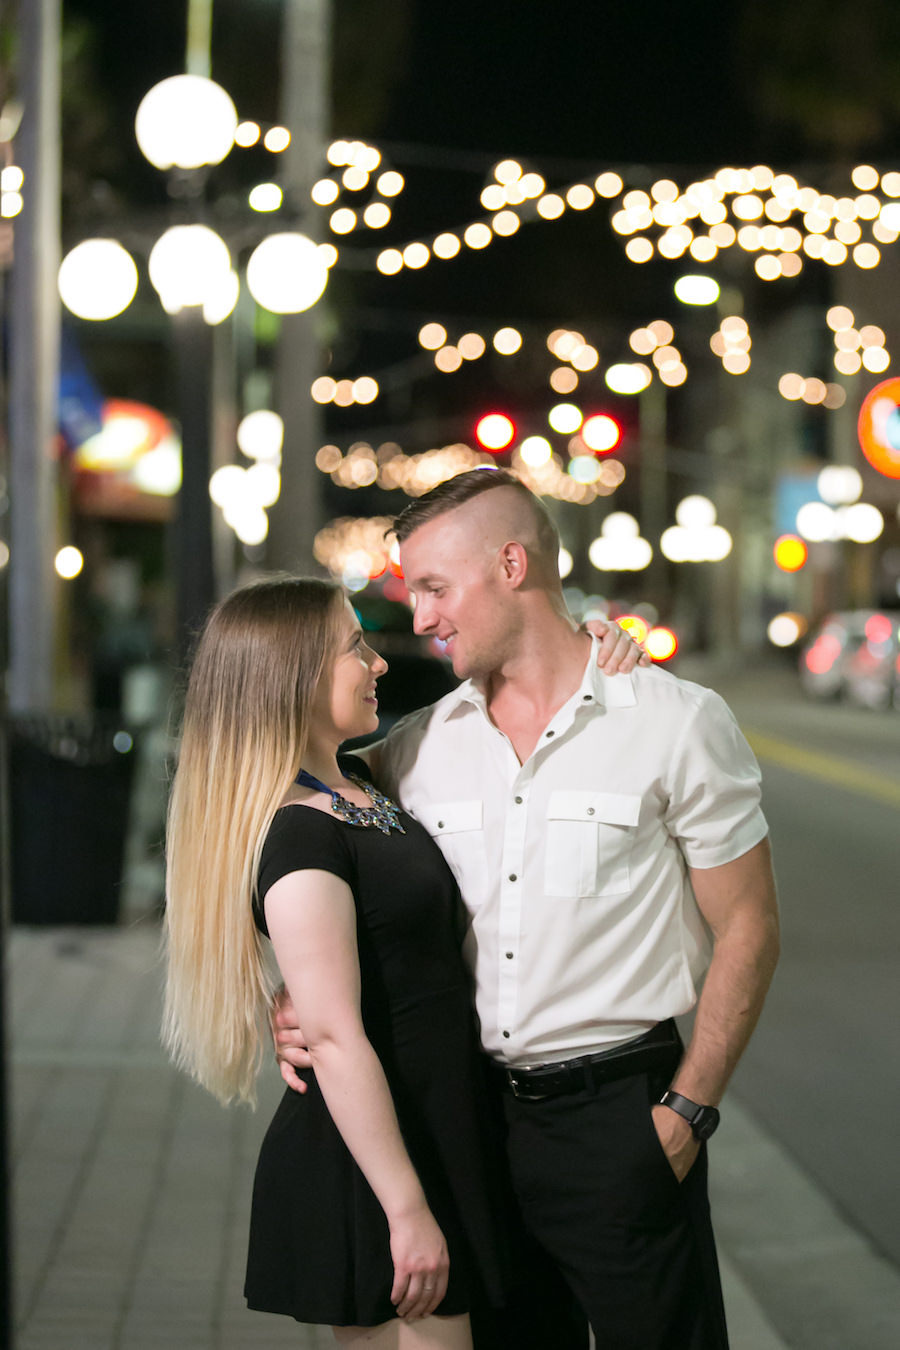 Downtown Tampa Ybor City Engagement Portrait With Twinkle Lights | Tampa Wedding Photographer Carrie Wildes Photography